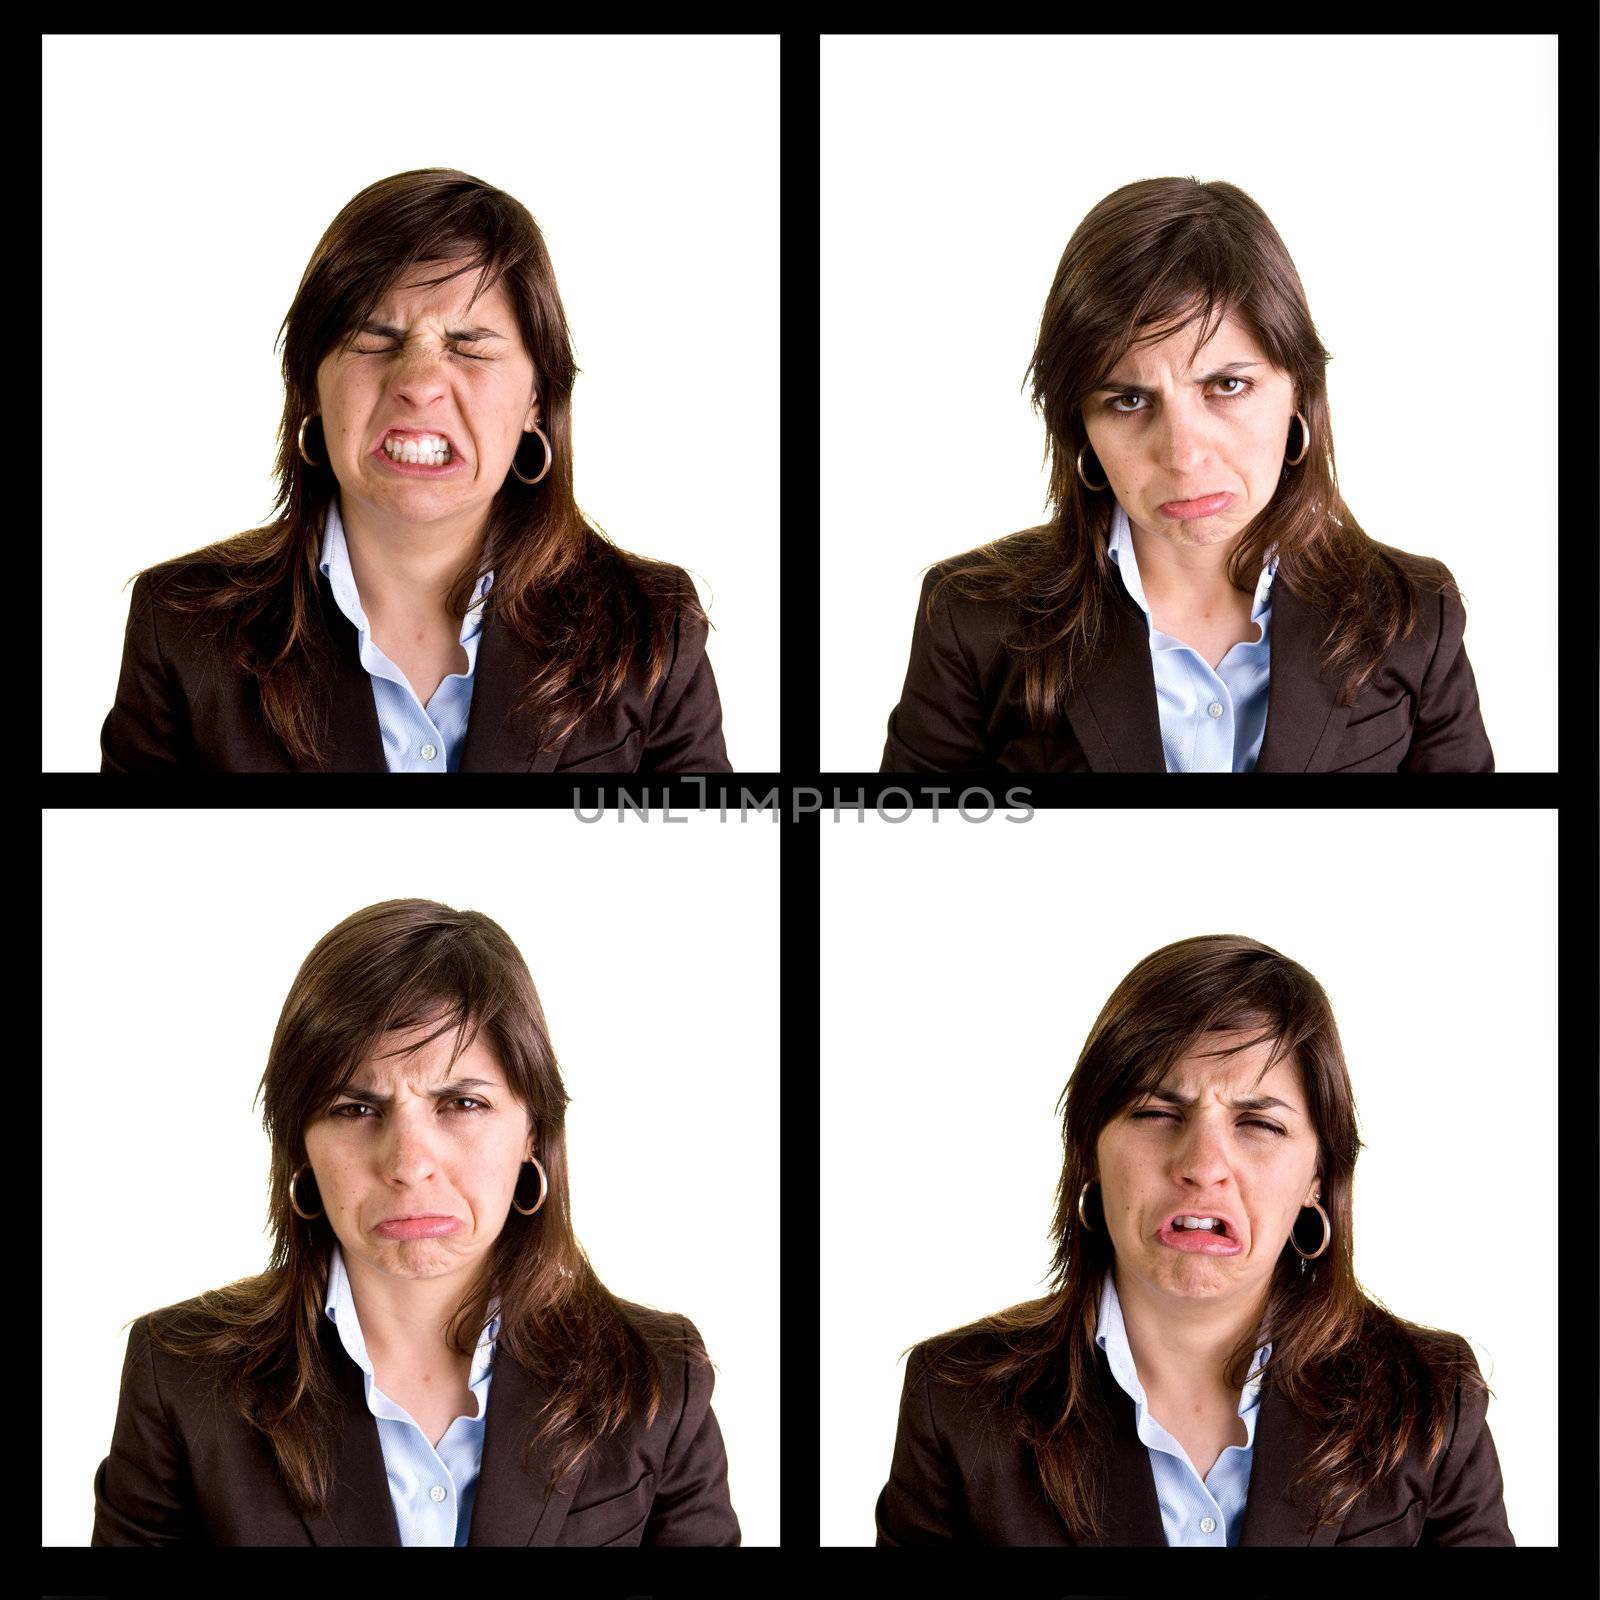 Collection of 4 businesswoman portraits with sad expressions - each photo has 3000px wide